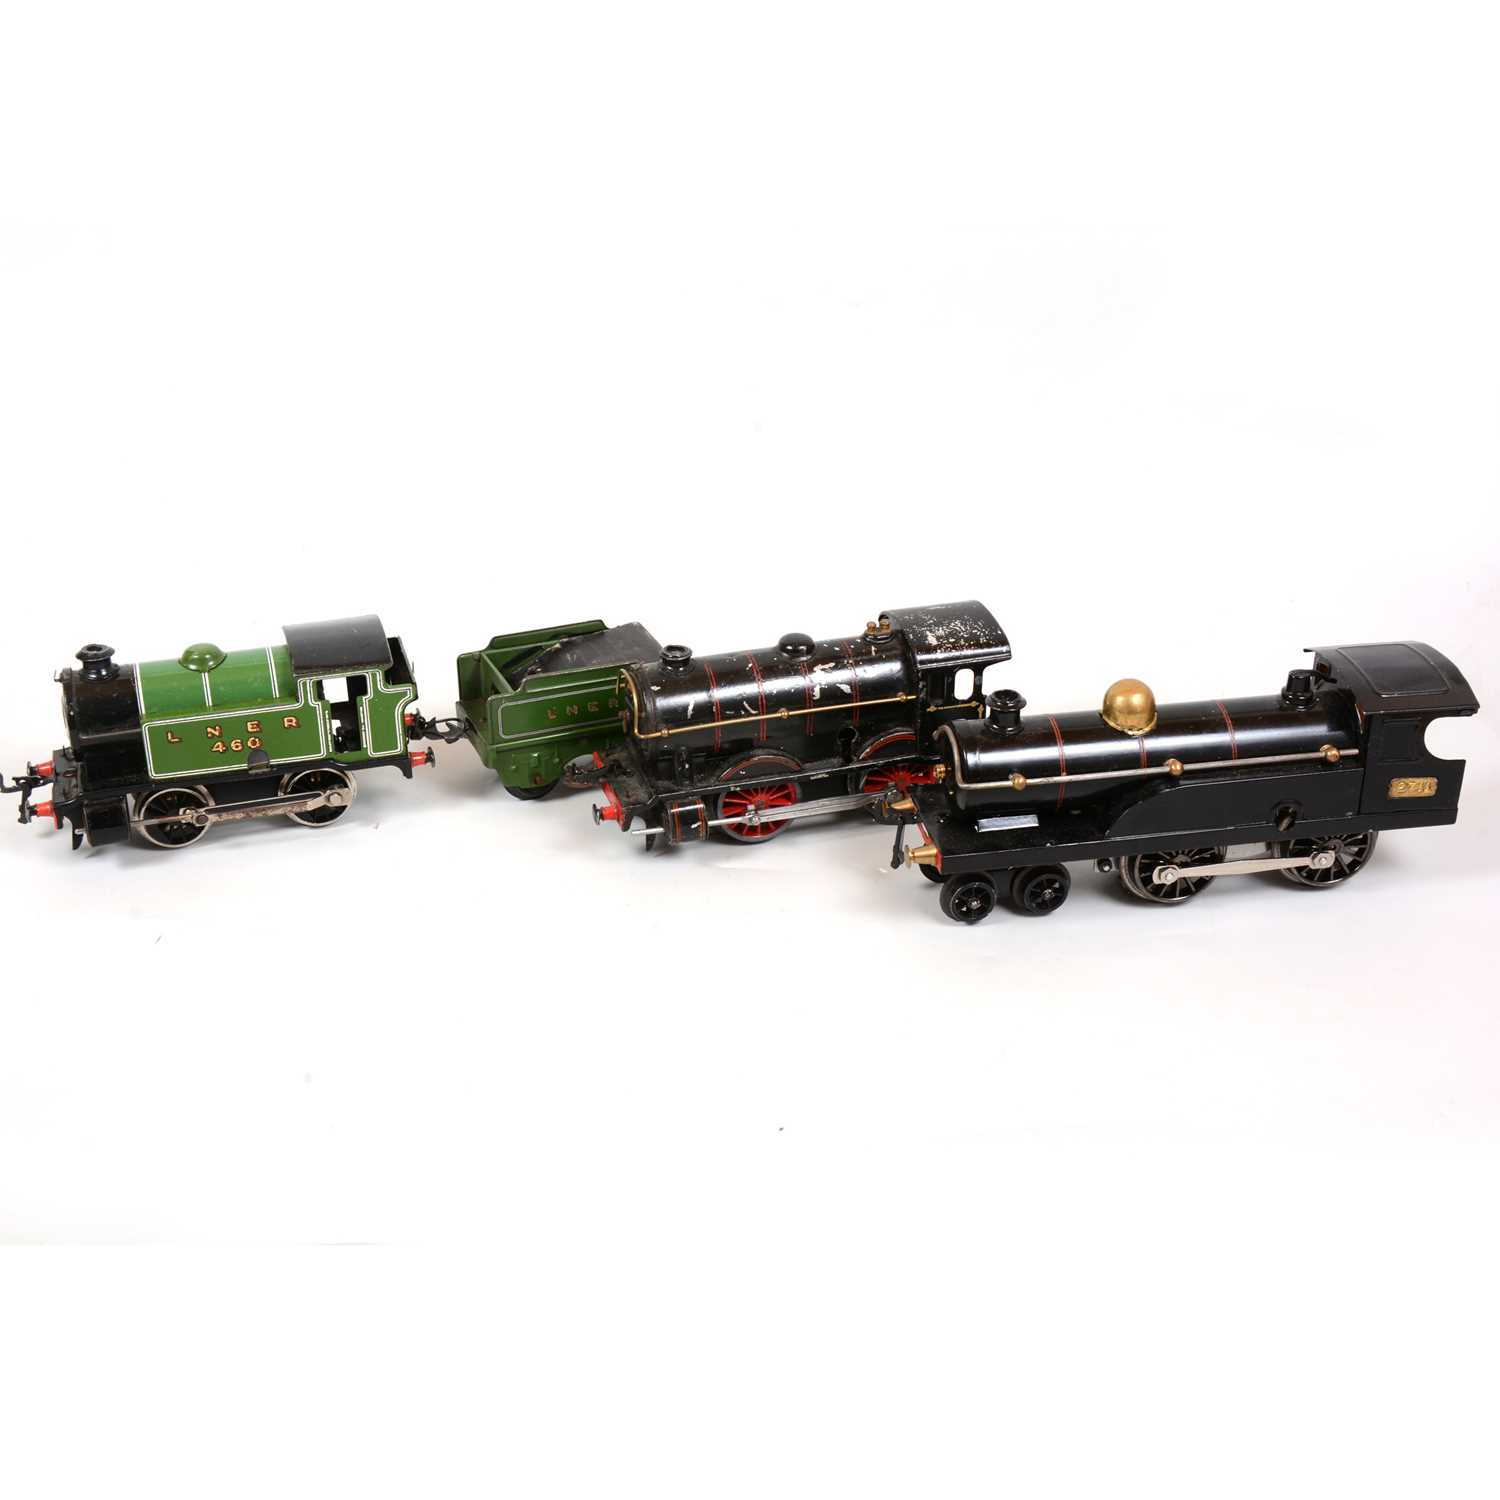 Lot 23 - Three Hornby O gauge electric model railway locomotives, all converted to electric.